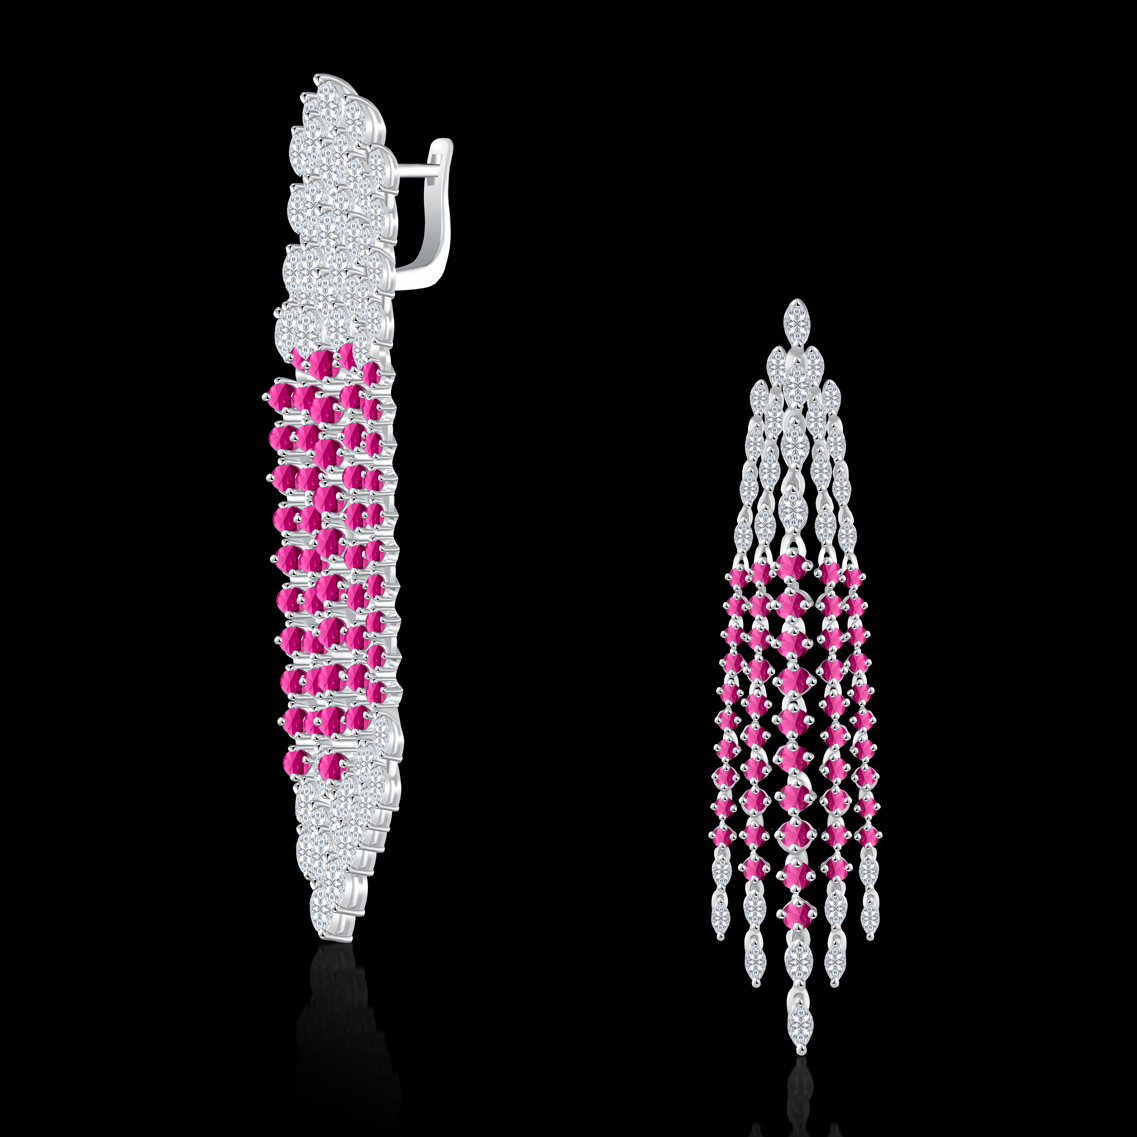 Dangling earrings mixed between round stones and rubies  - NADL-ER